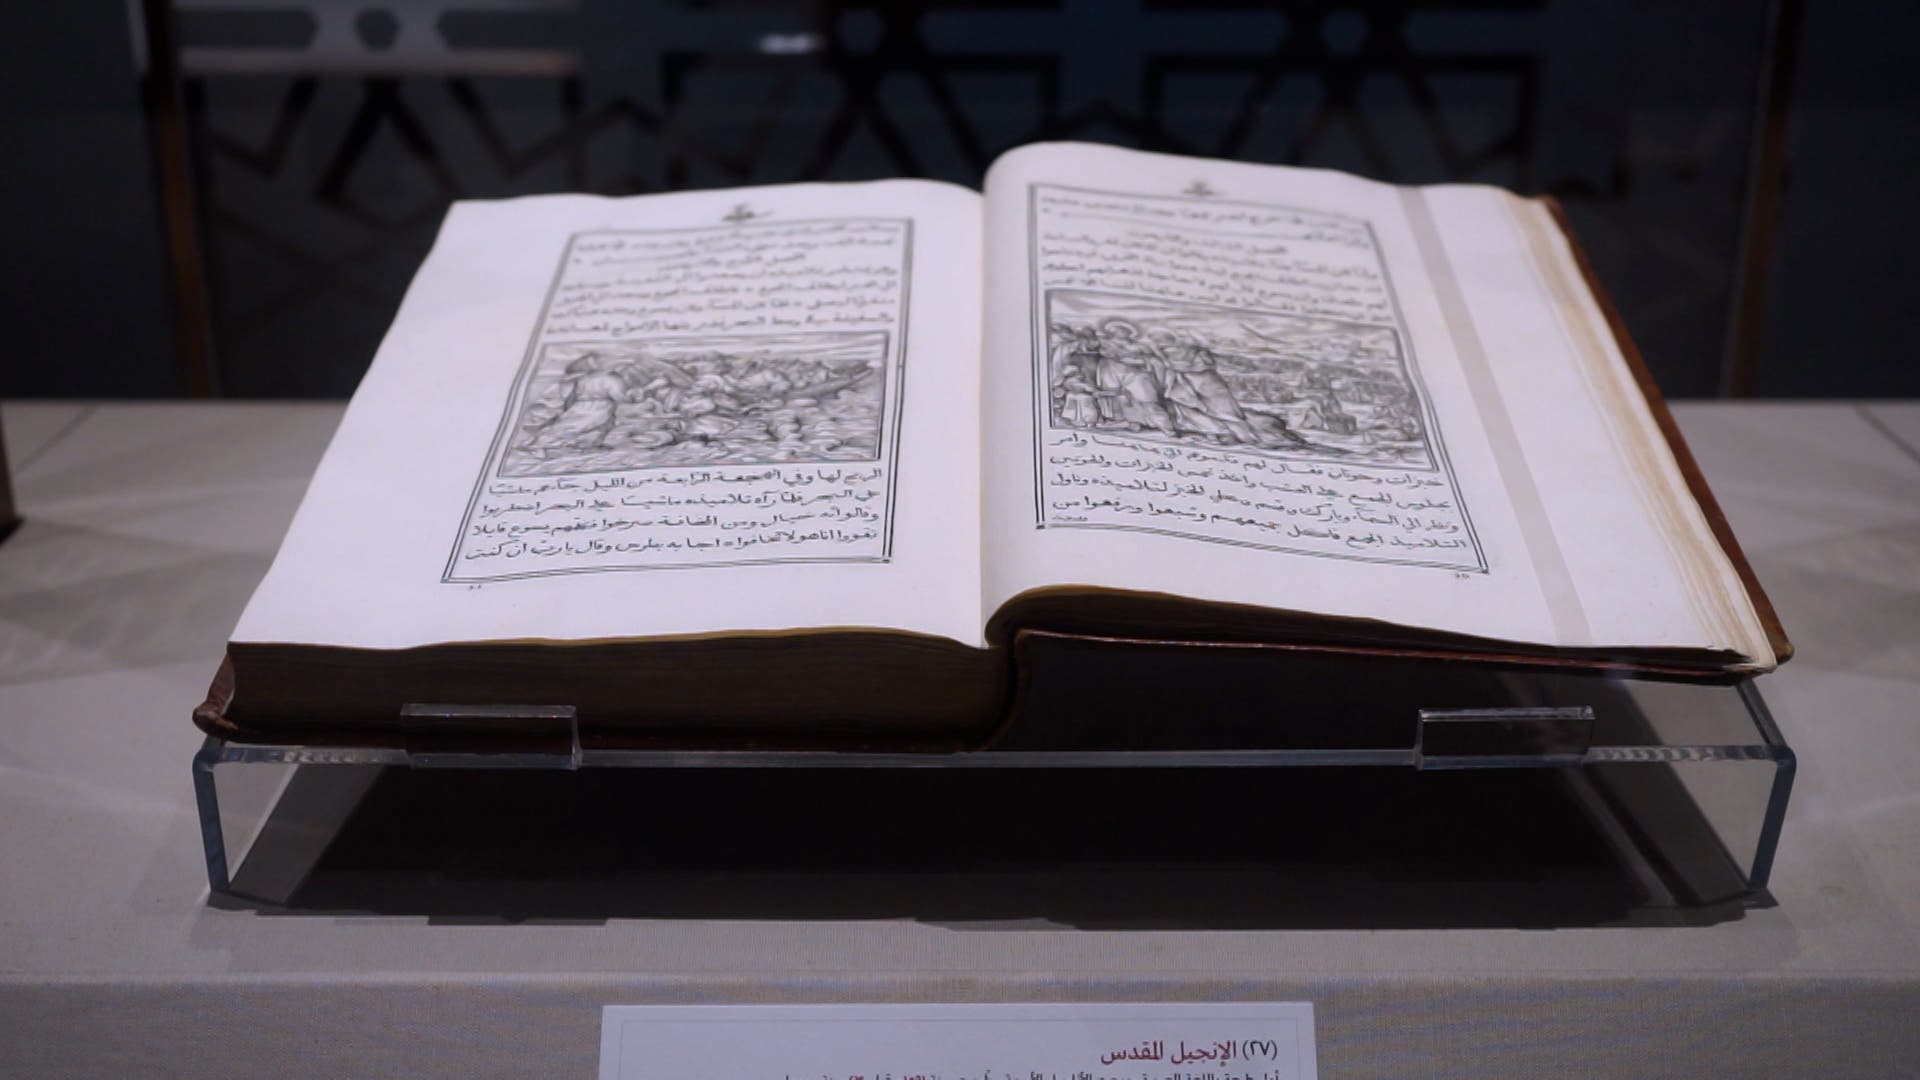 The Asfar exhibition displaying historical manuscripts, some as old as 2000 years, opens in Riyadh. 